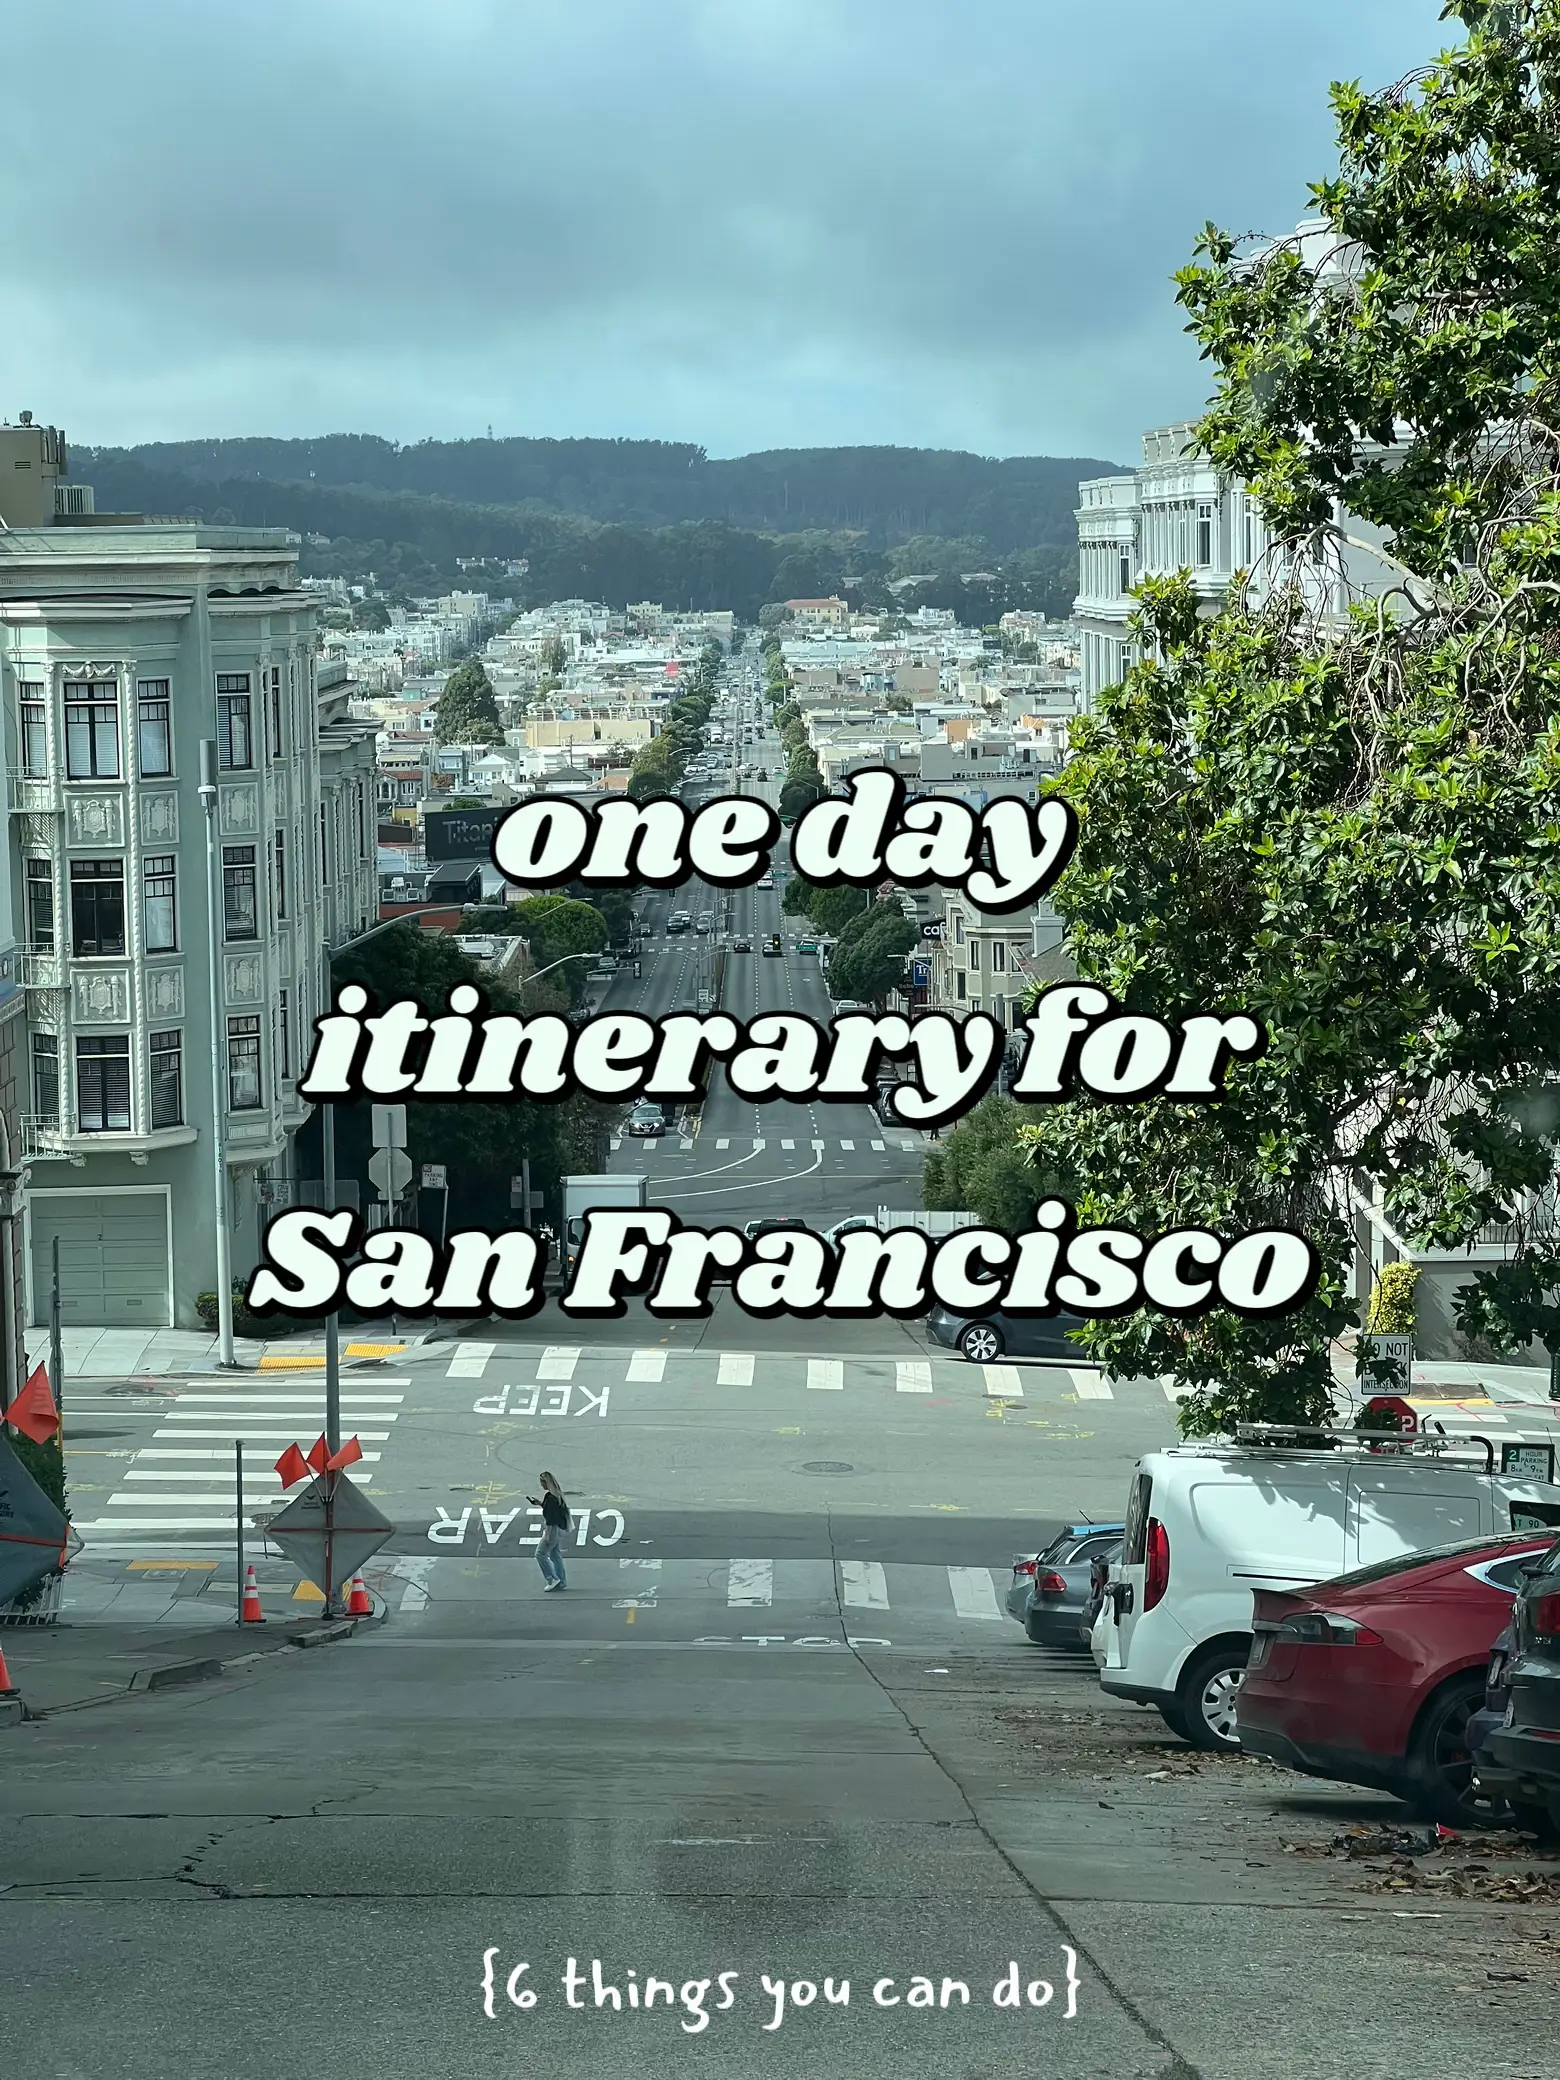 fun things to do with one day in SF !!'s images